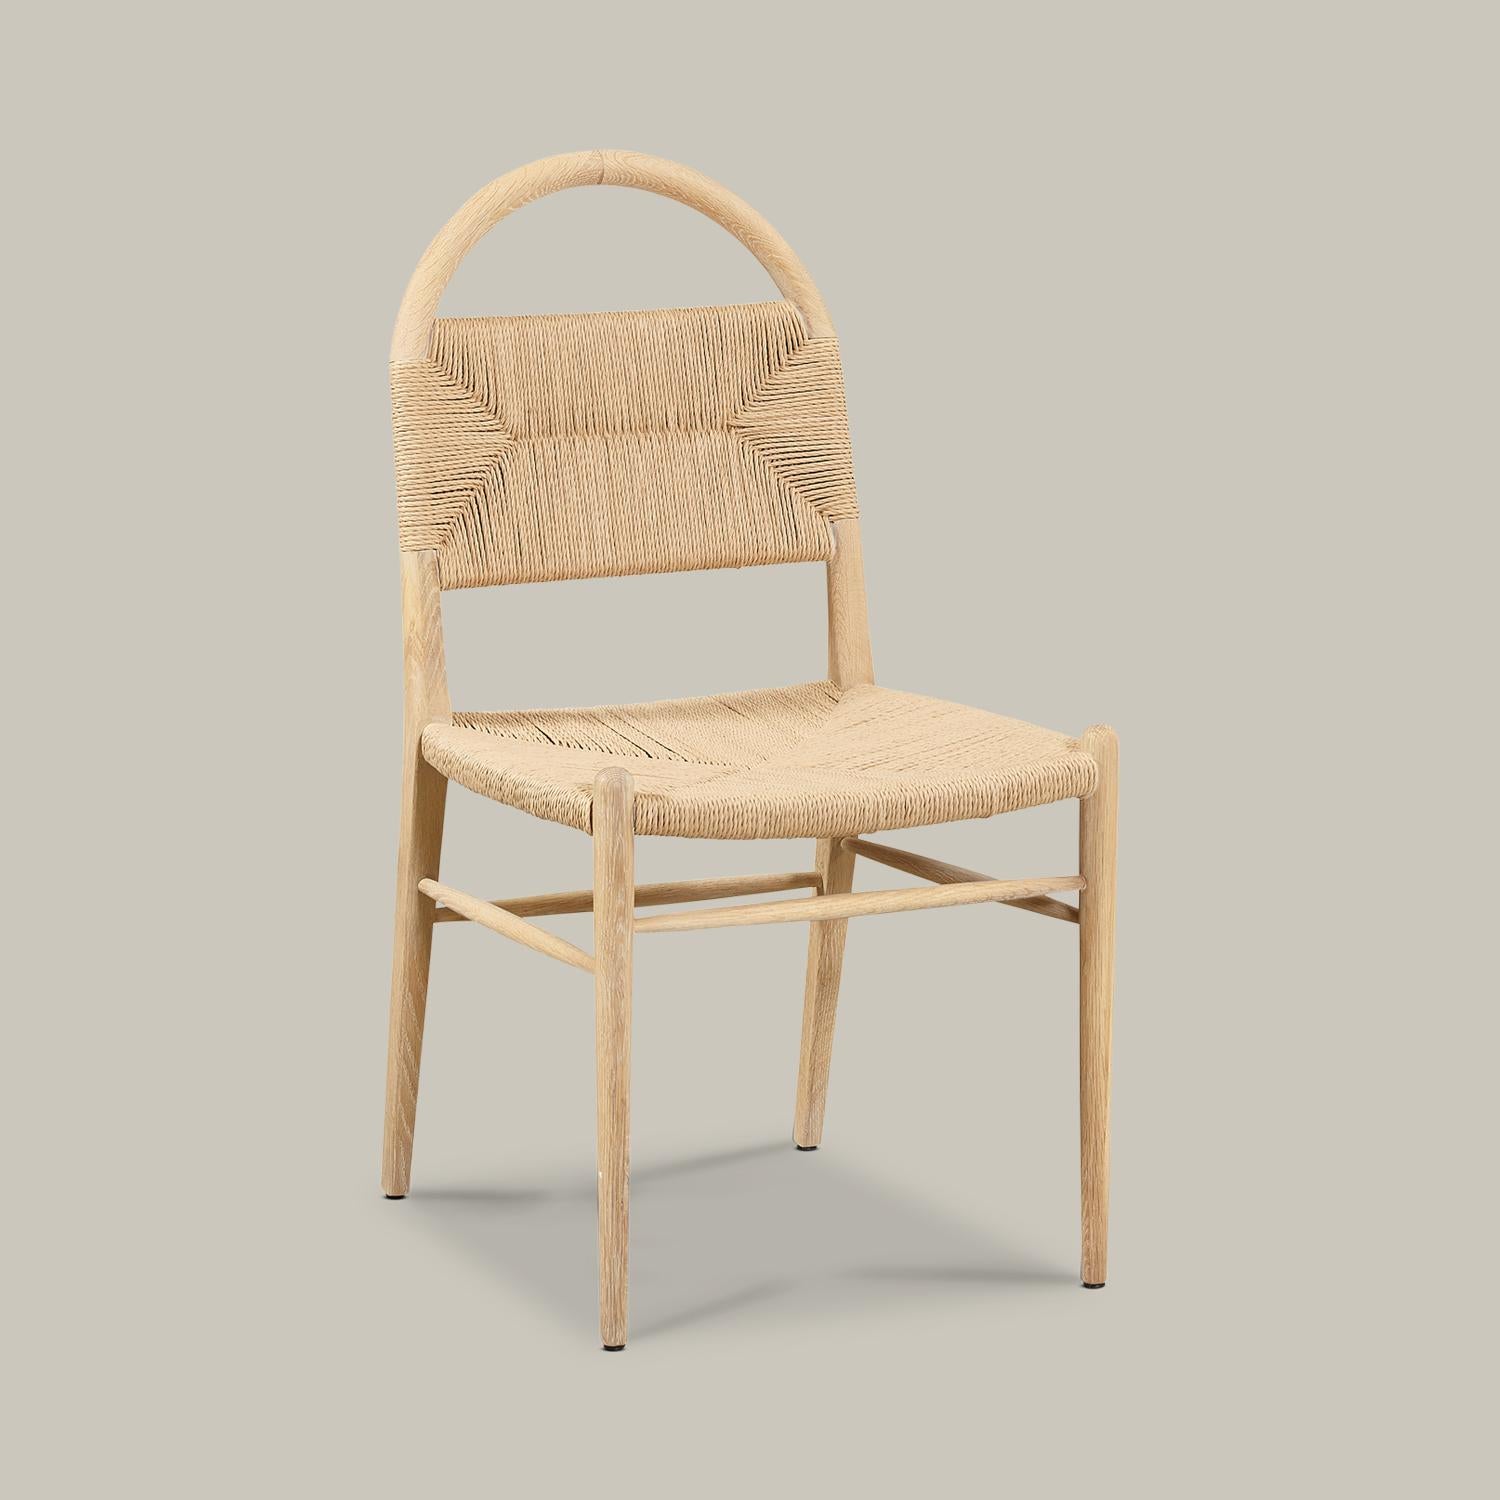 A solid wood arched frame threads through a woven rush seat with arms and backrest to form this well-proportioned, minimalist chair for dining, desk, vanity or an accent in any room. Handmade by artisans in Vietnam, this piece is available in